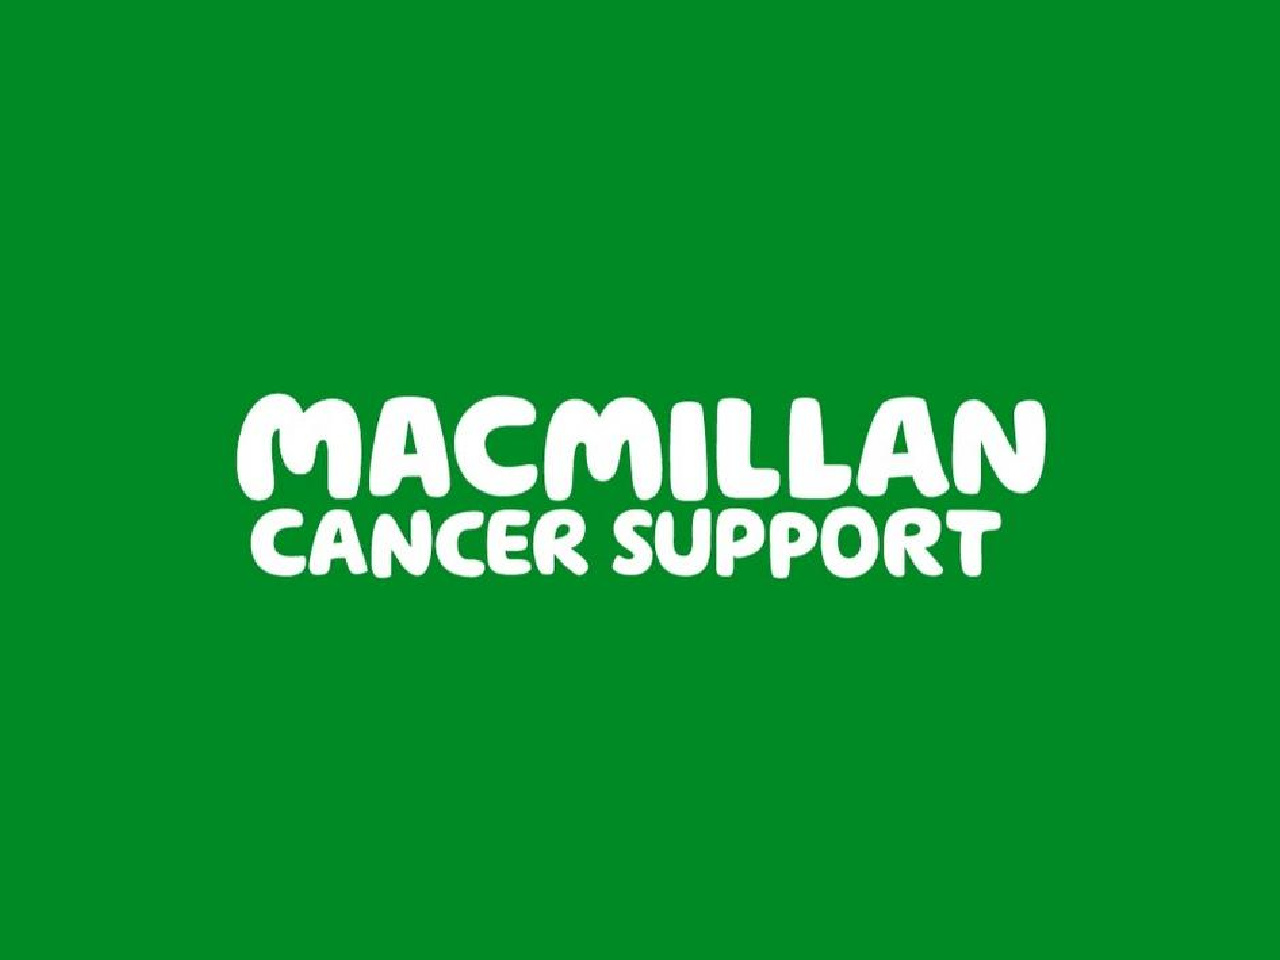 £5,000 donation to The Friends of Staffordshire Macmillan Cancer Support